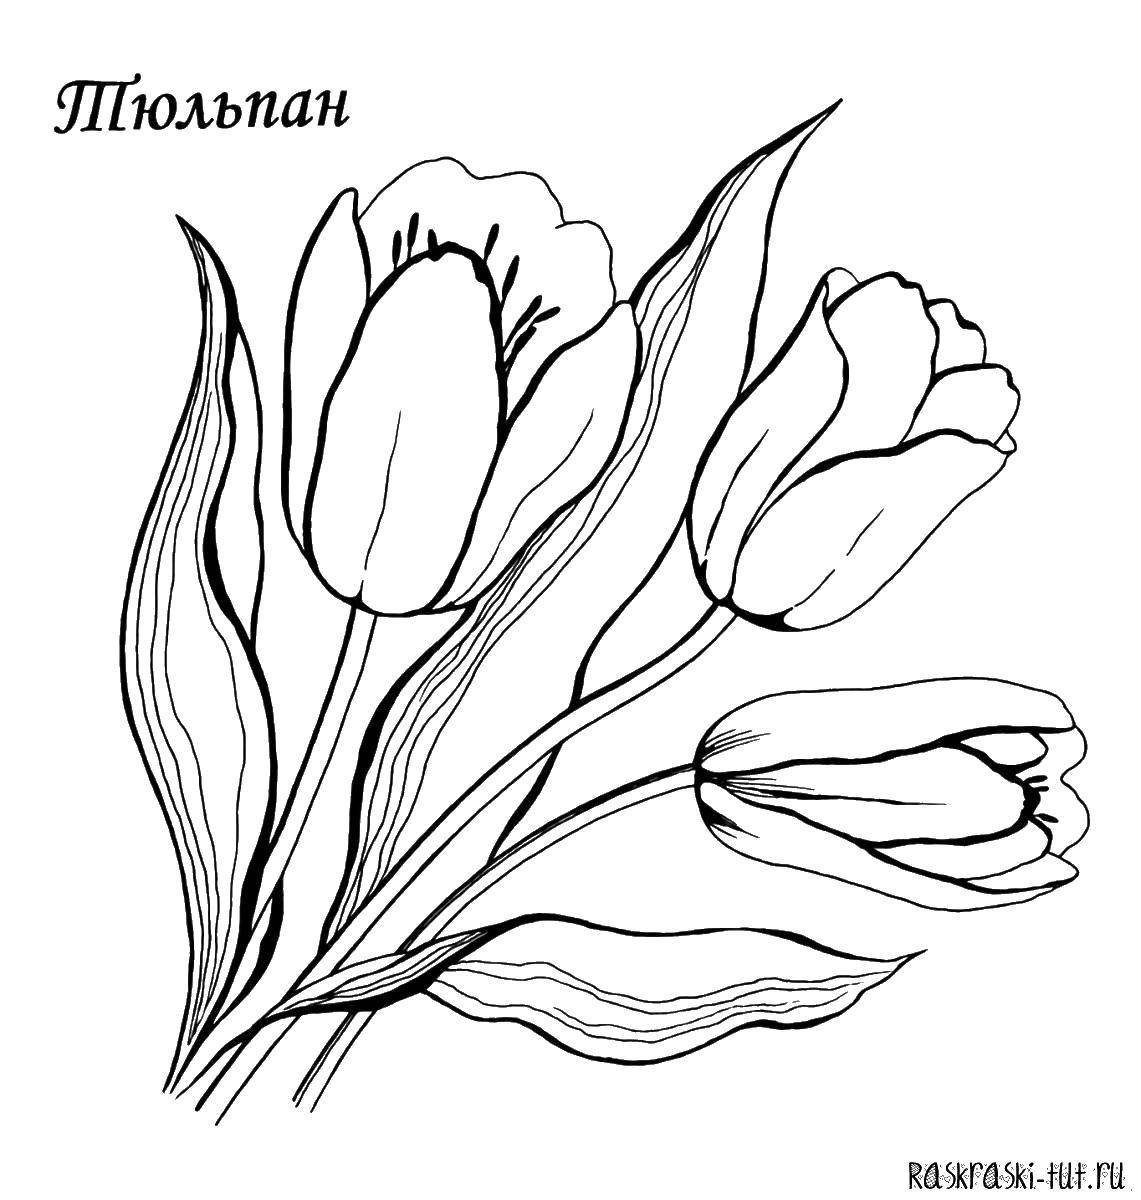 Coloring The buds of tulips. Category flowers. Tags:  Flowers, tulips.